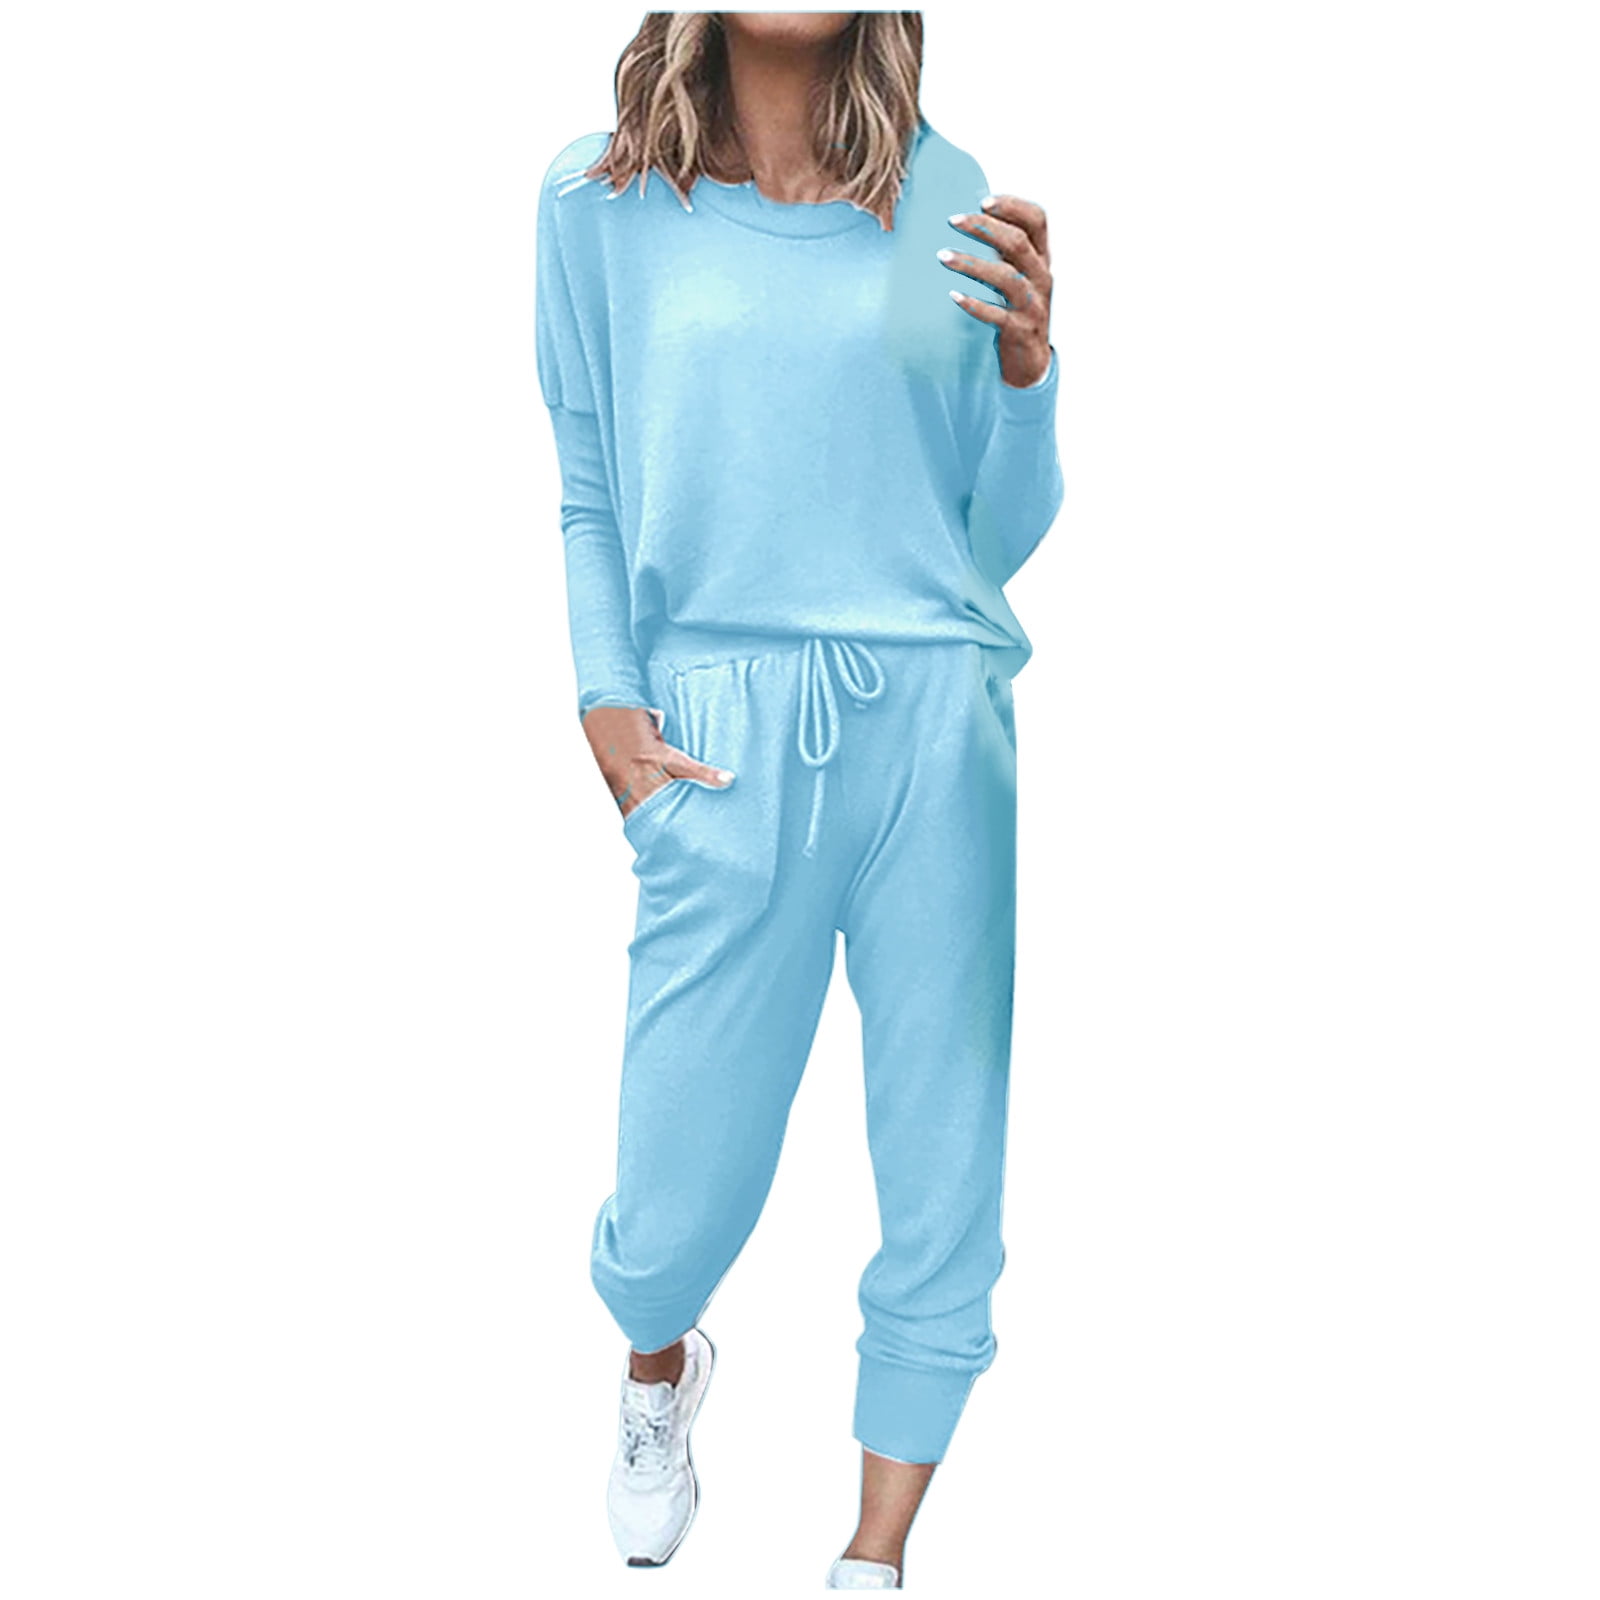 HOTSUIT Sauna Suit Women Weight Loss Boxing Gym India | Ubuy